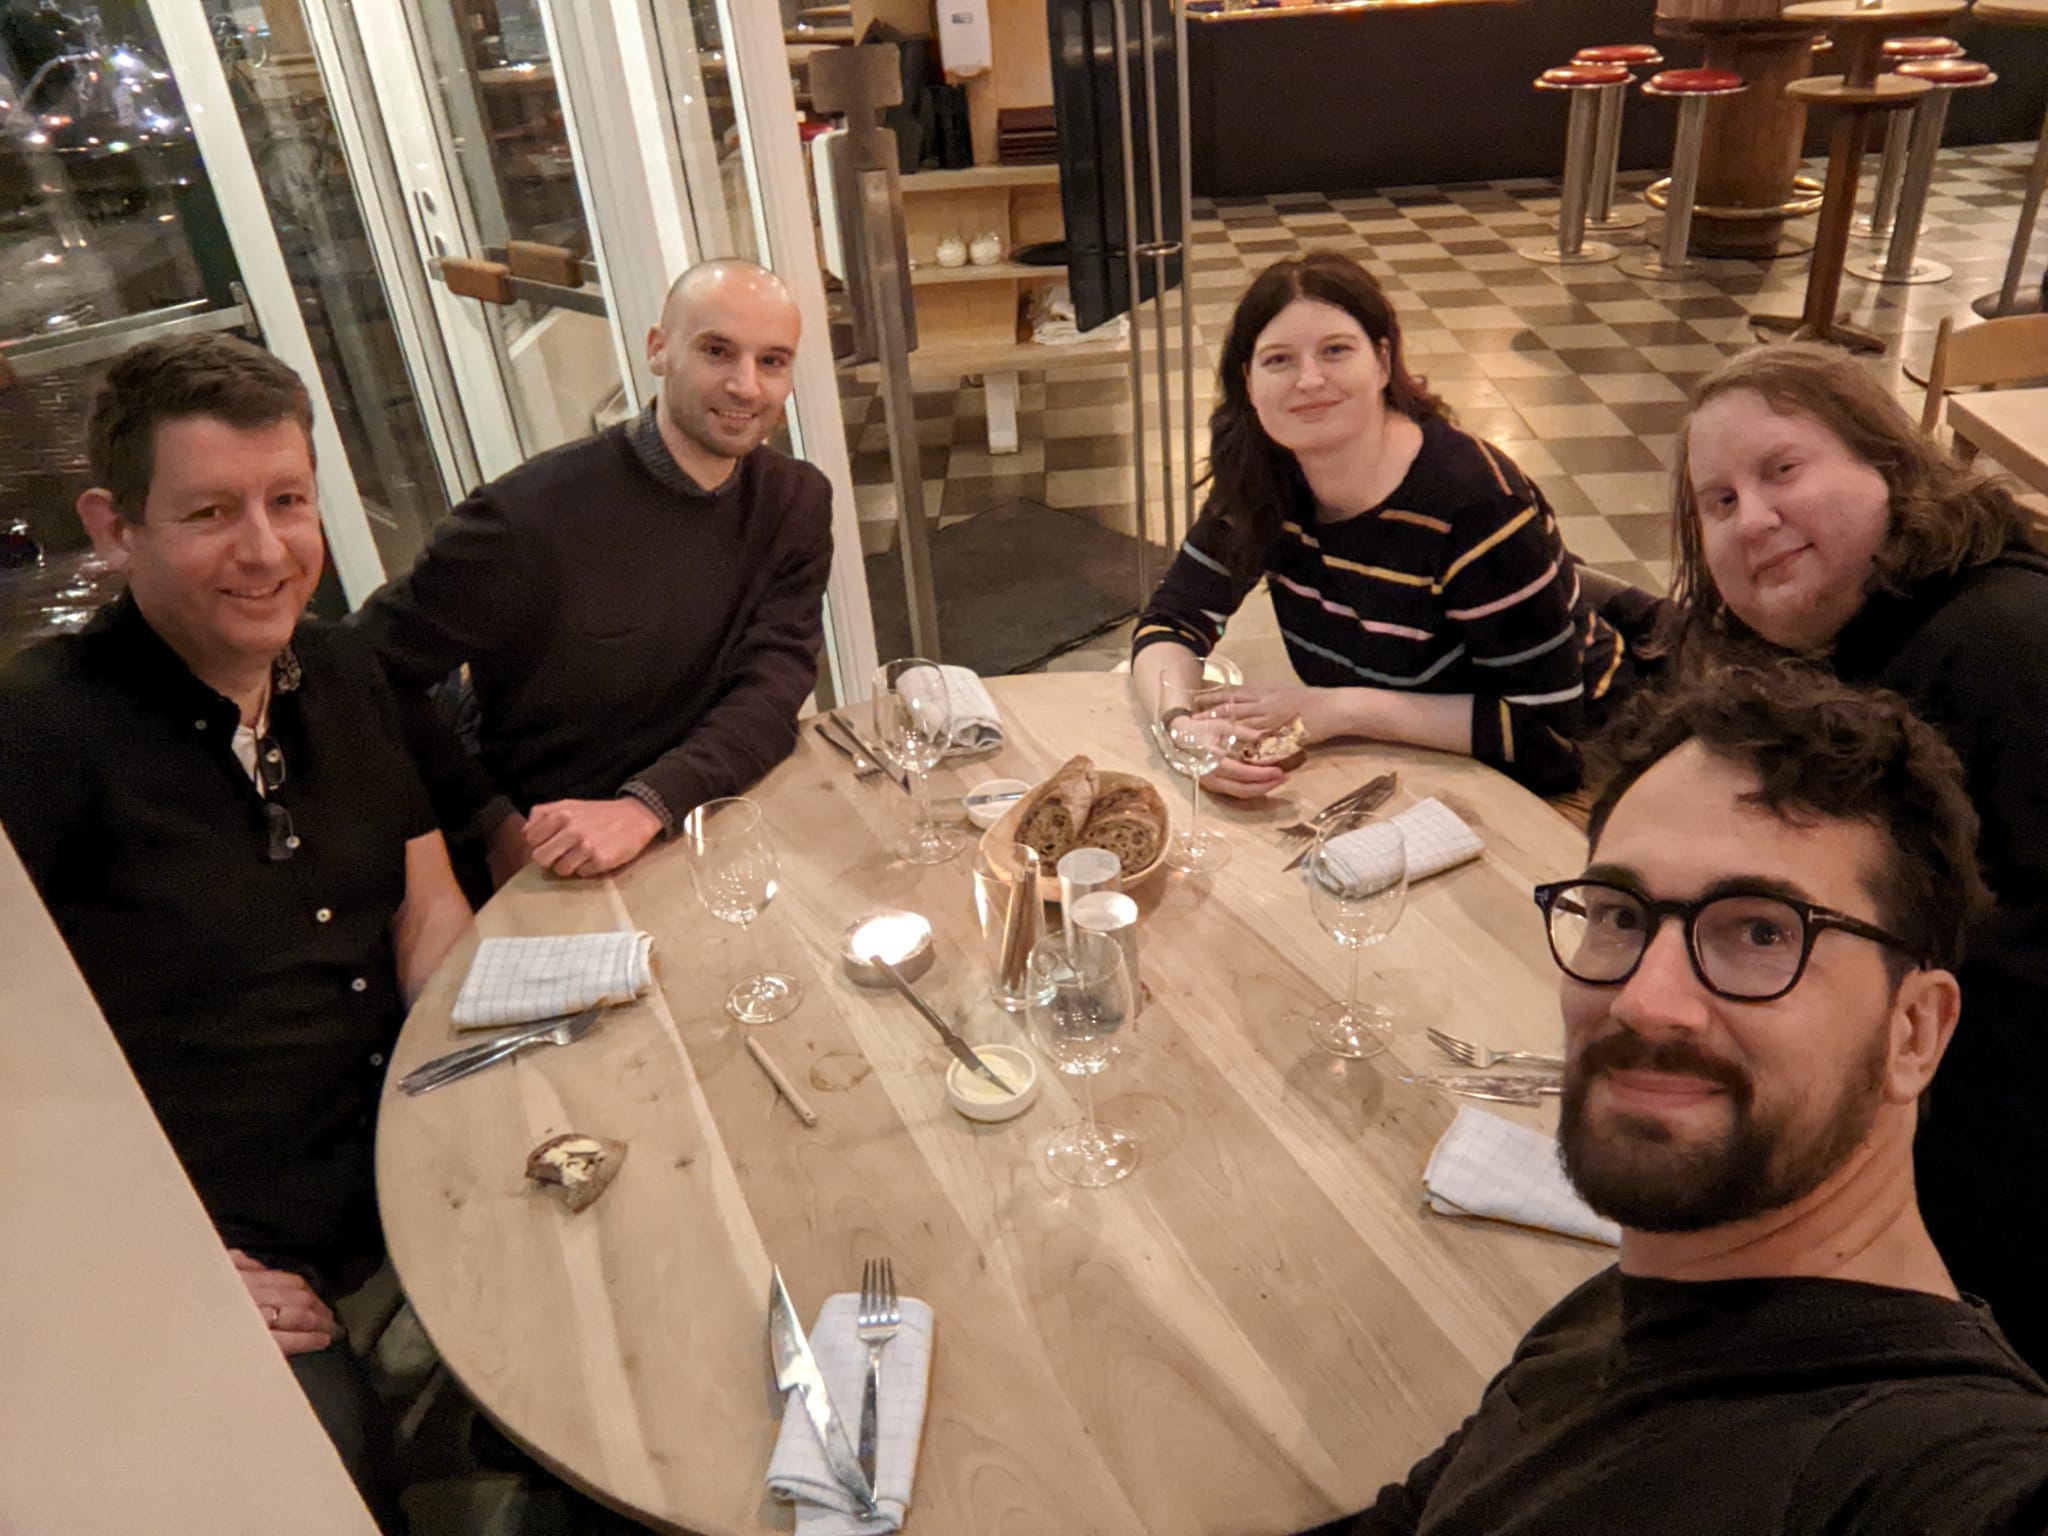 Speaker dinner with five people around a round table